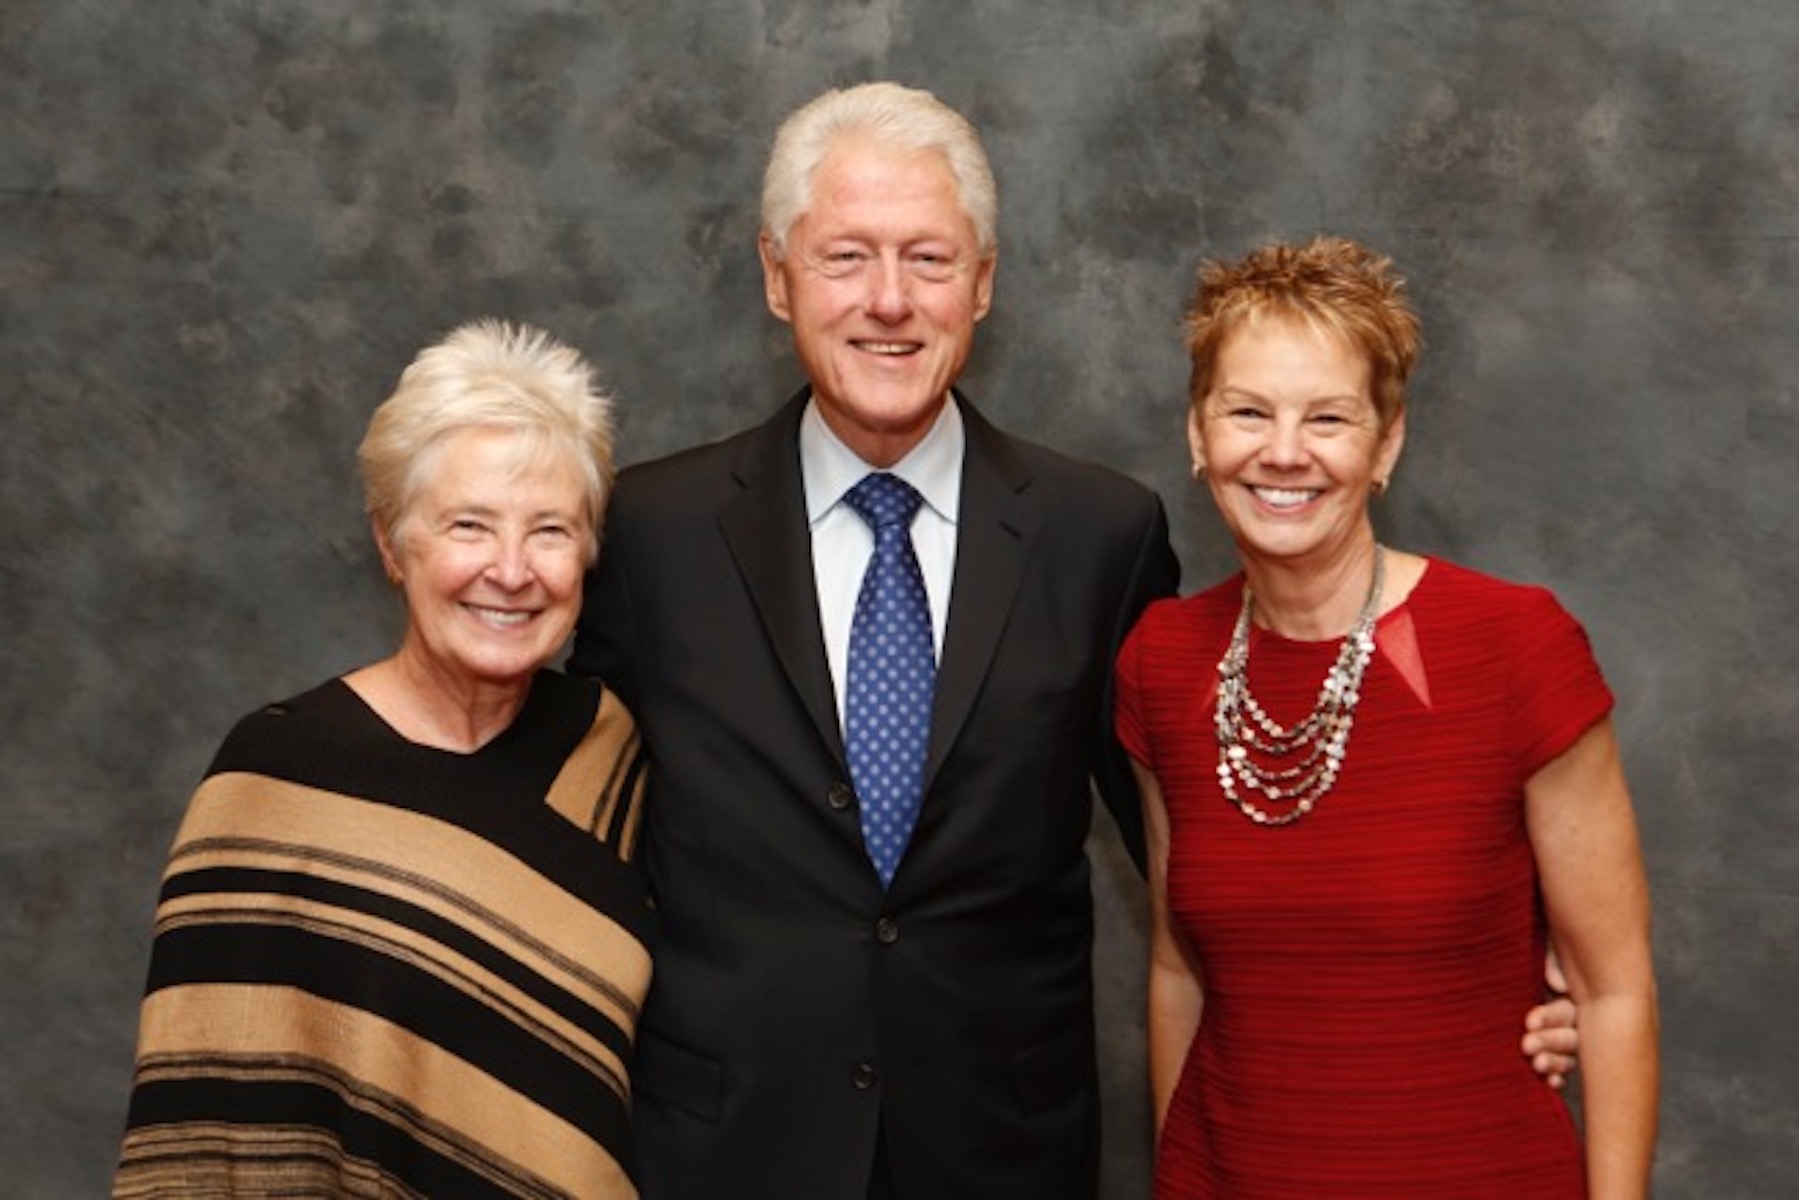 Amy Ross, partner Connie Hammen, and President Bill Clinton after his speech at USC, 2014, Los Angeles, CA.